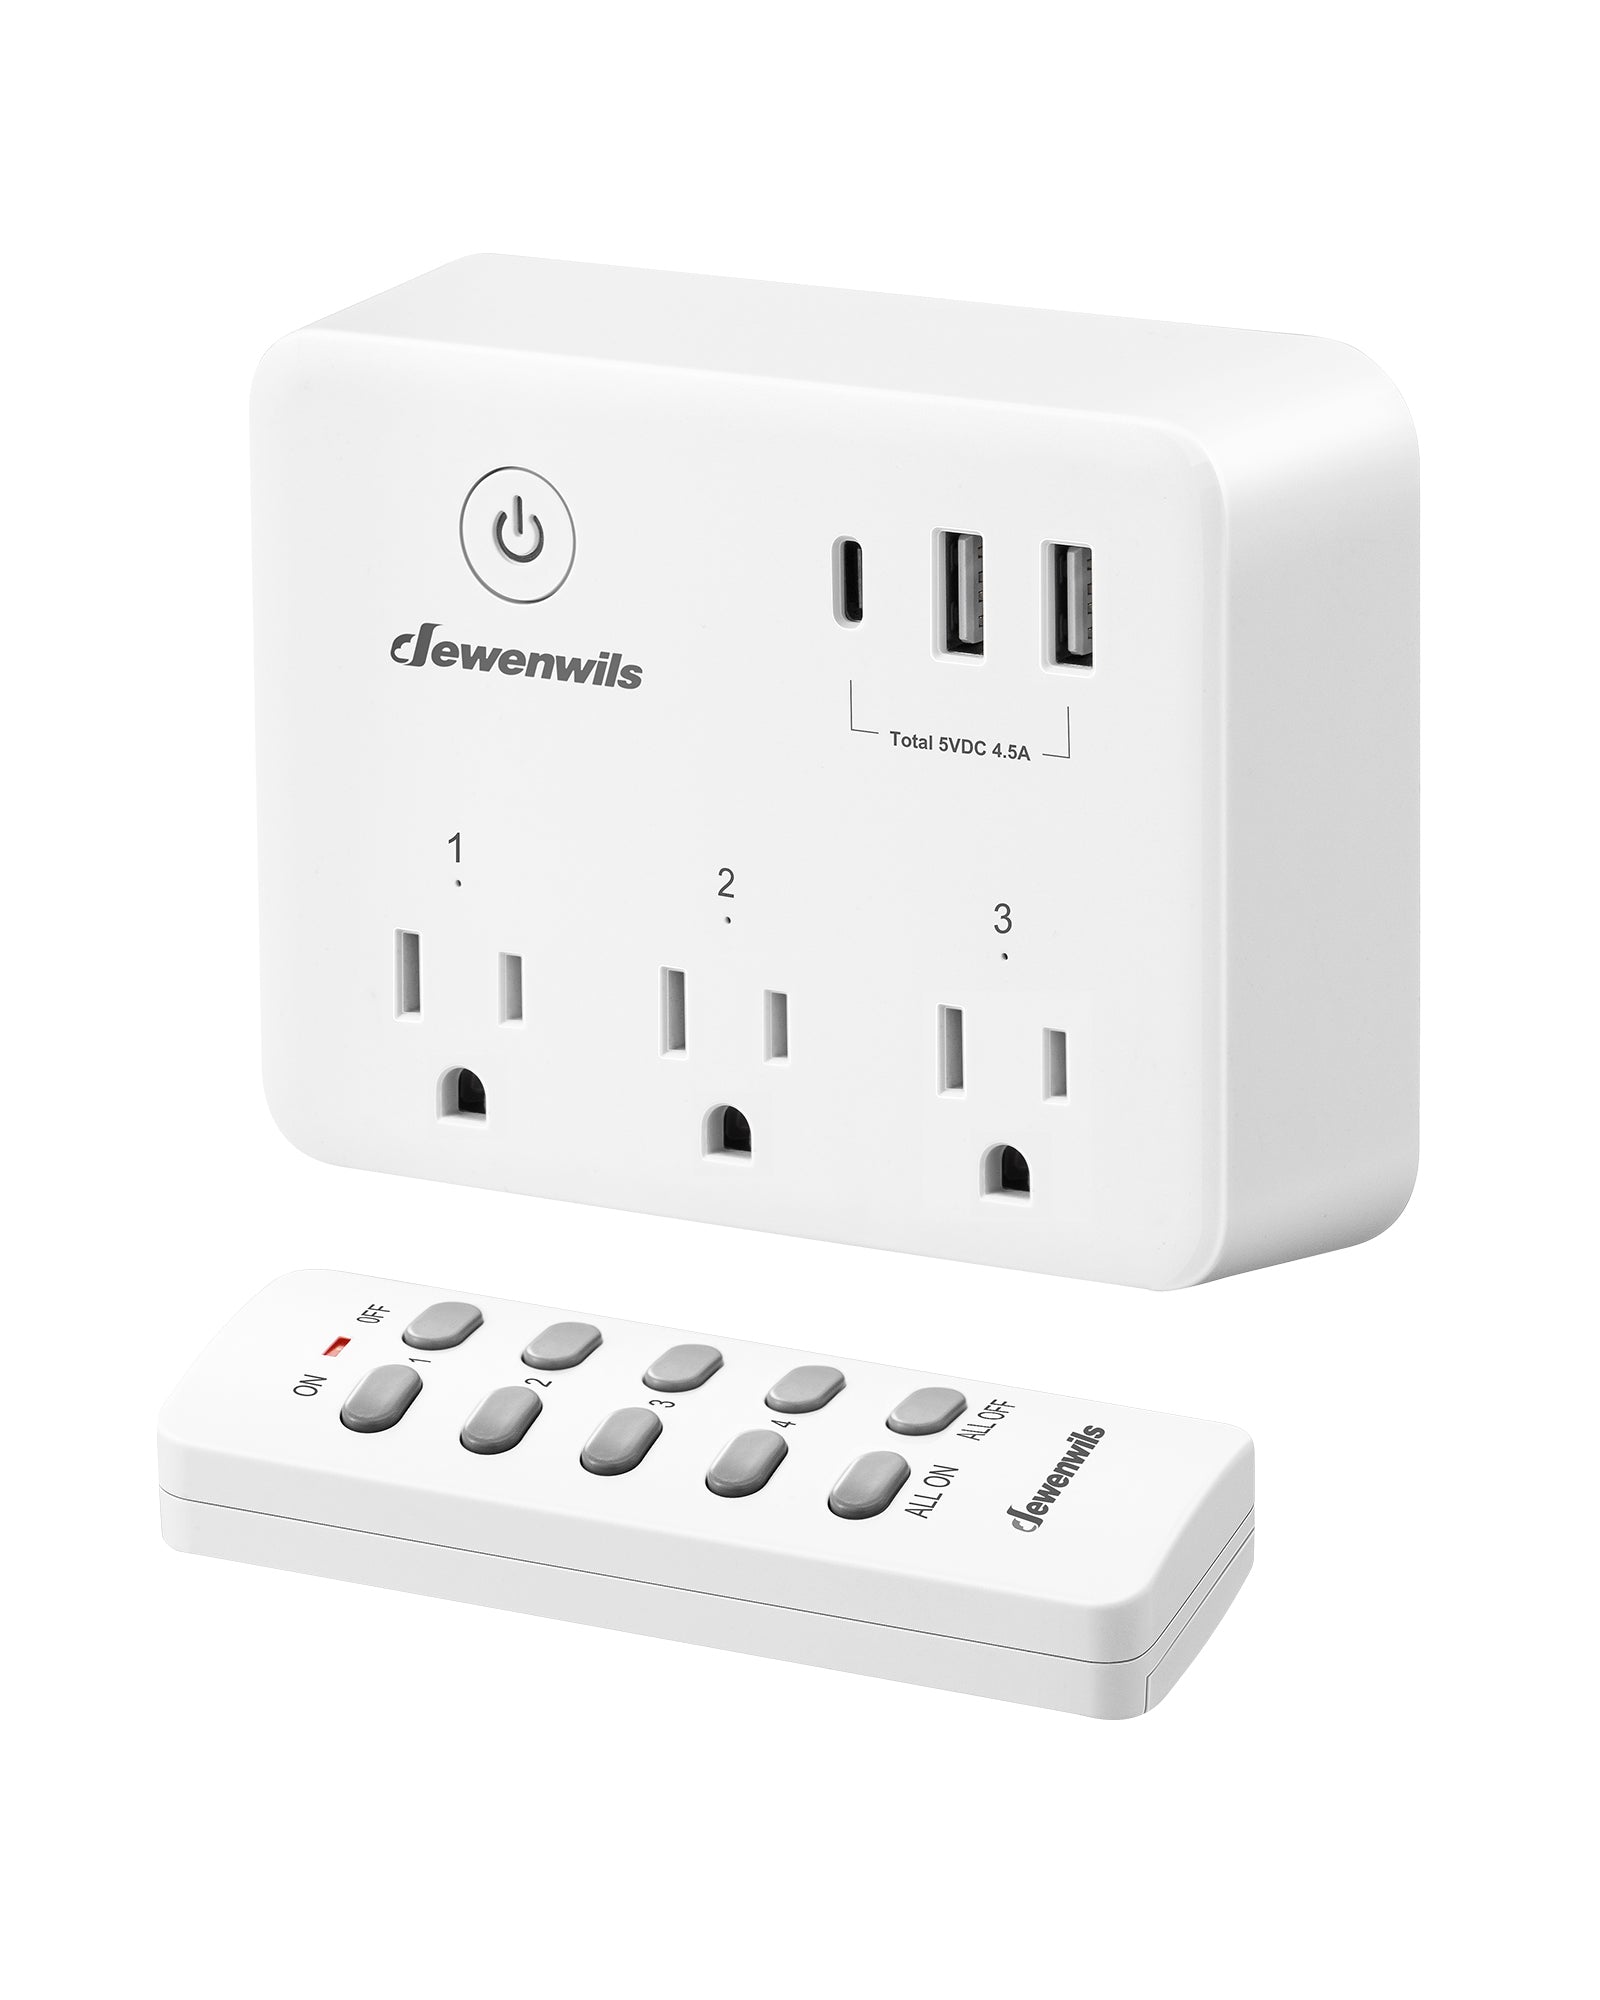 DEWENWILS Outdoor Remote Control Outlet Switch: Take Control of Your Outdoor  Devices! 